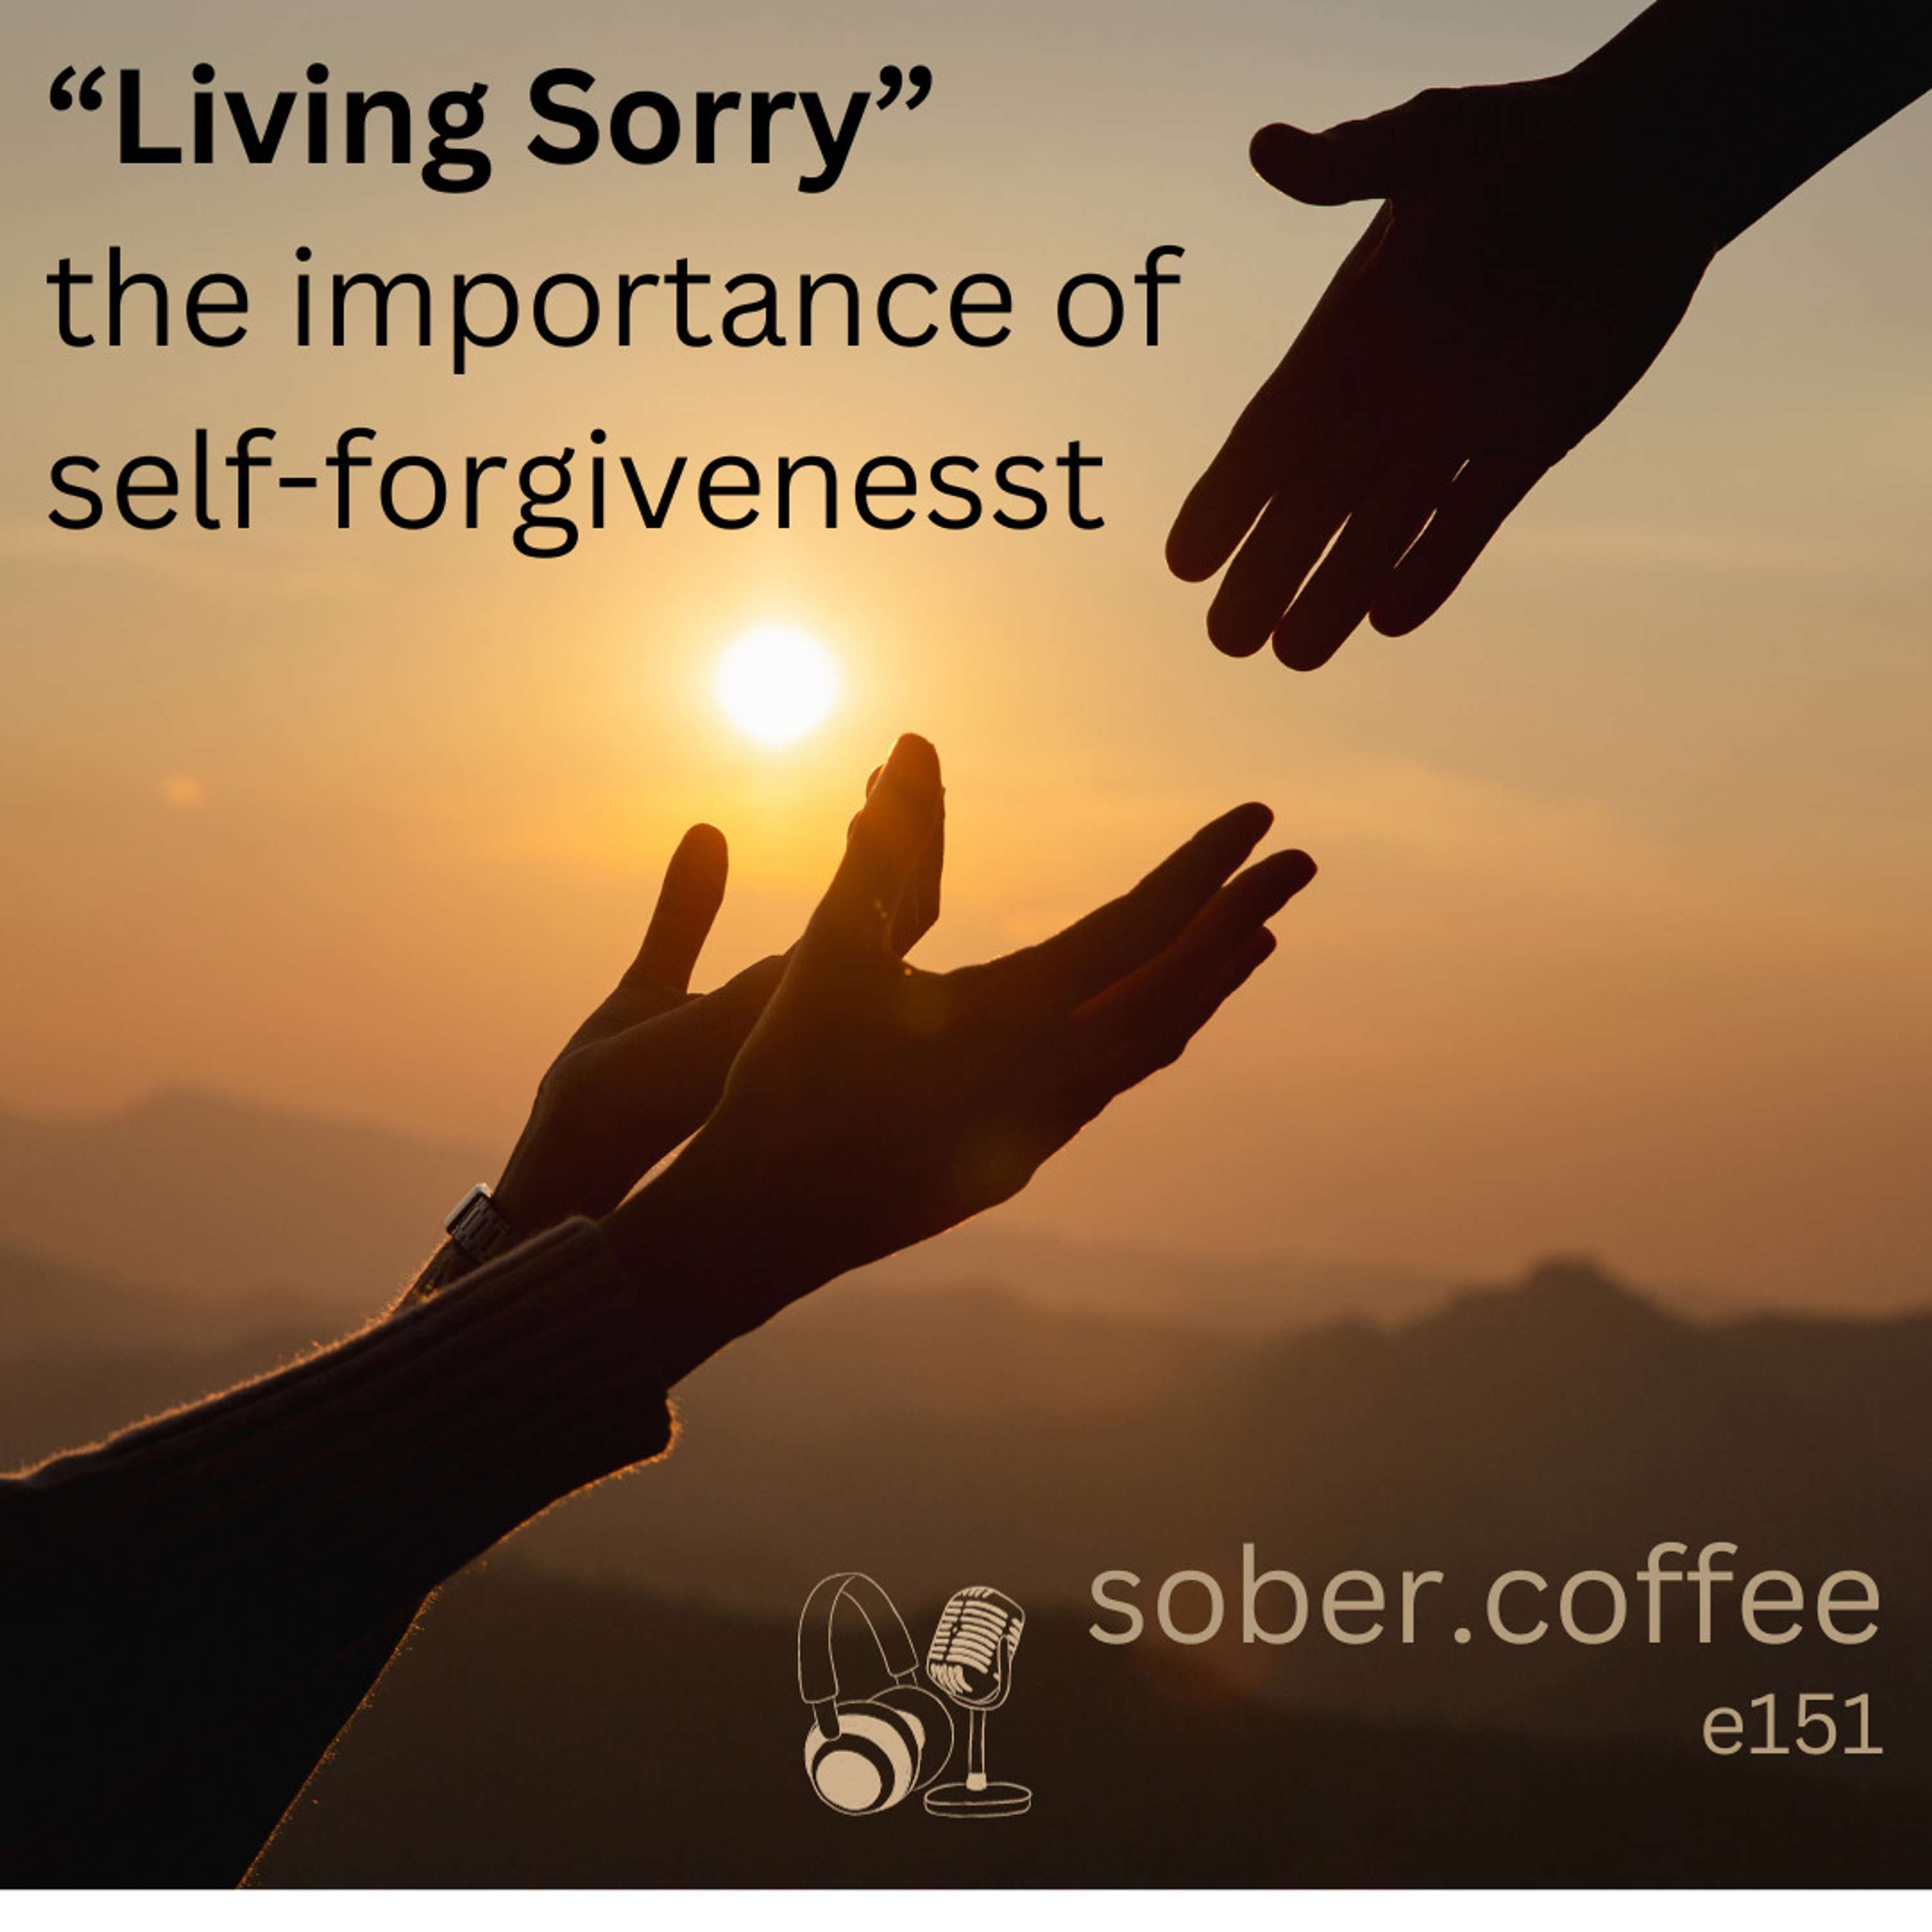 Living Sorry - the importance of self-forgiveness